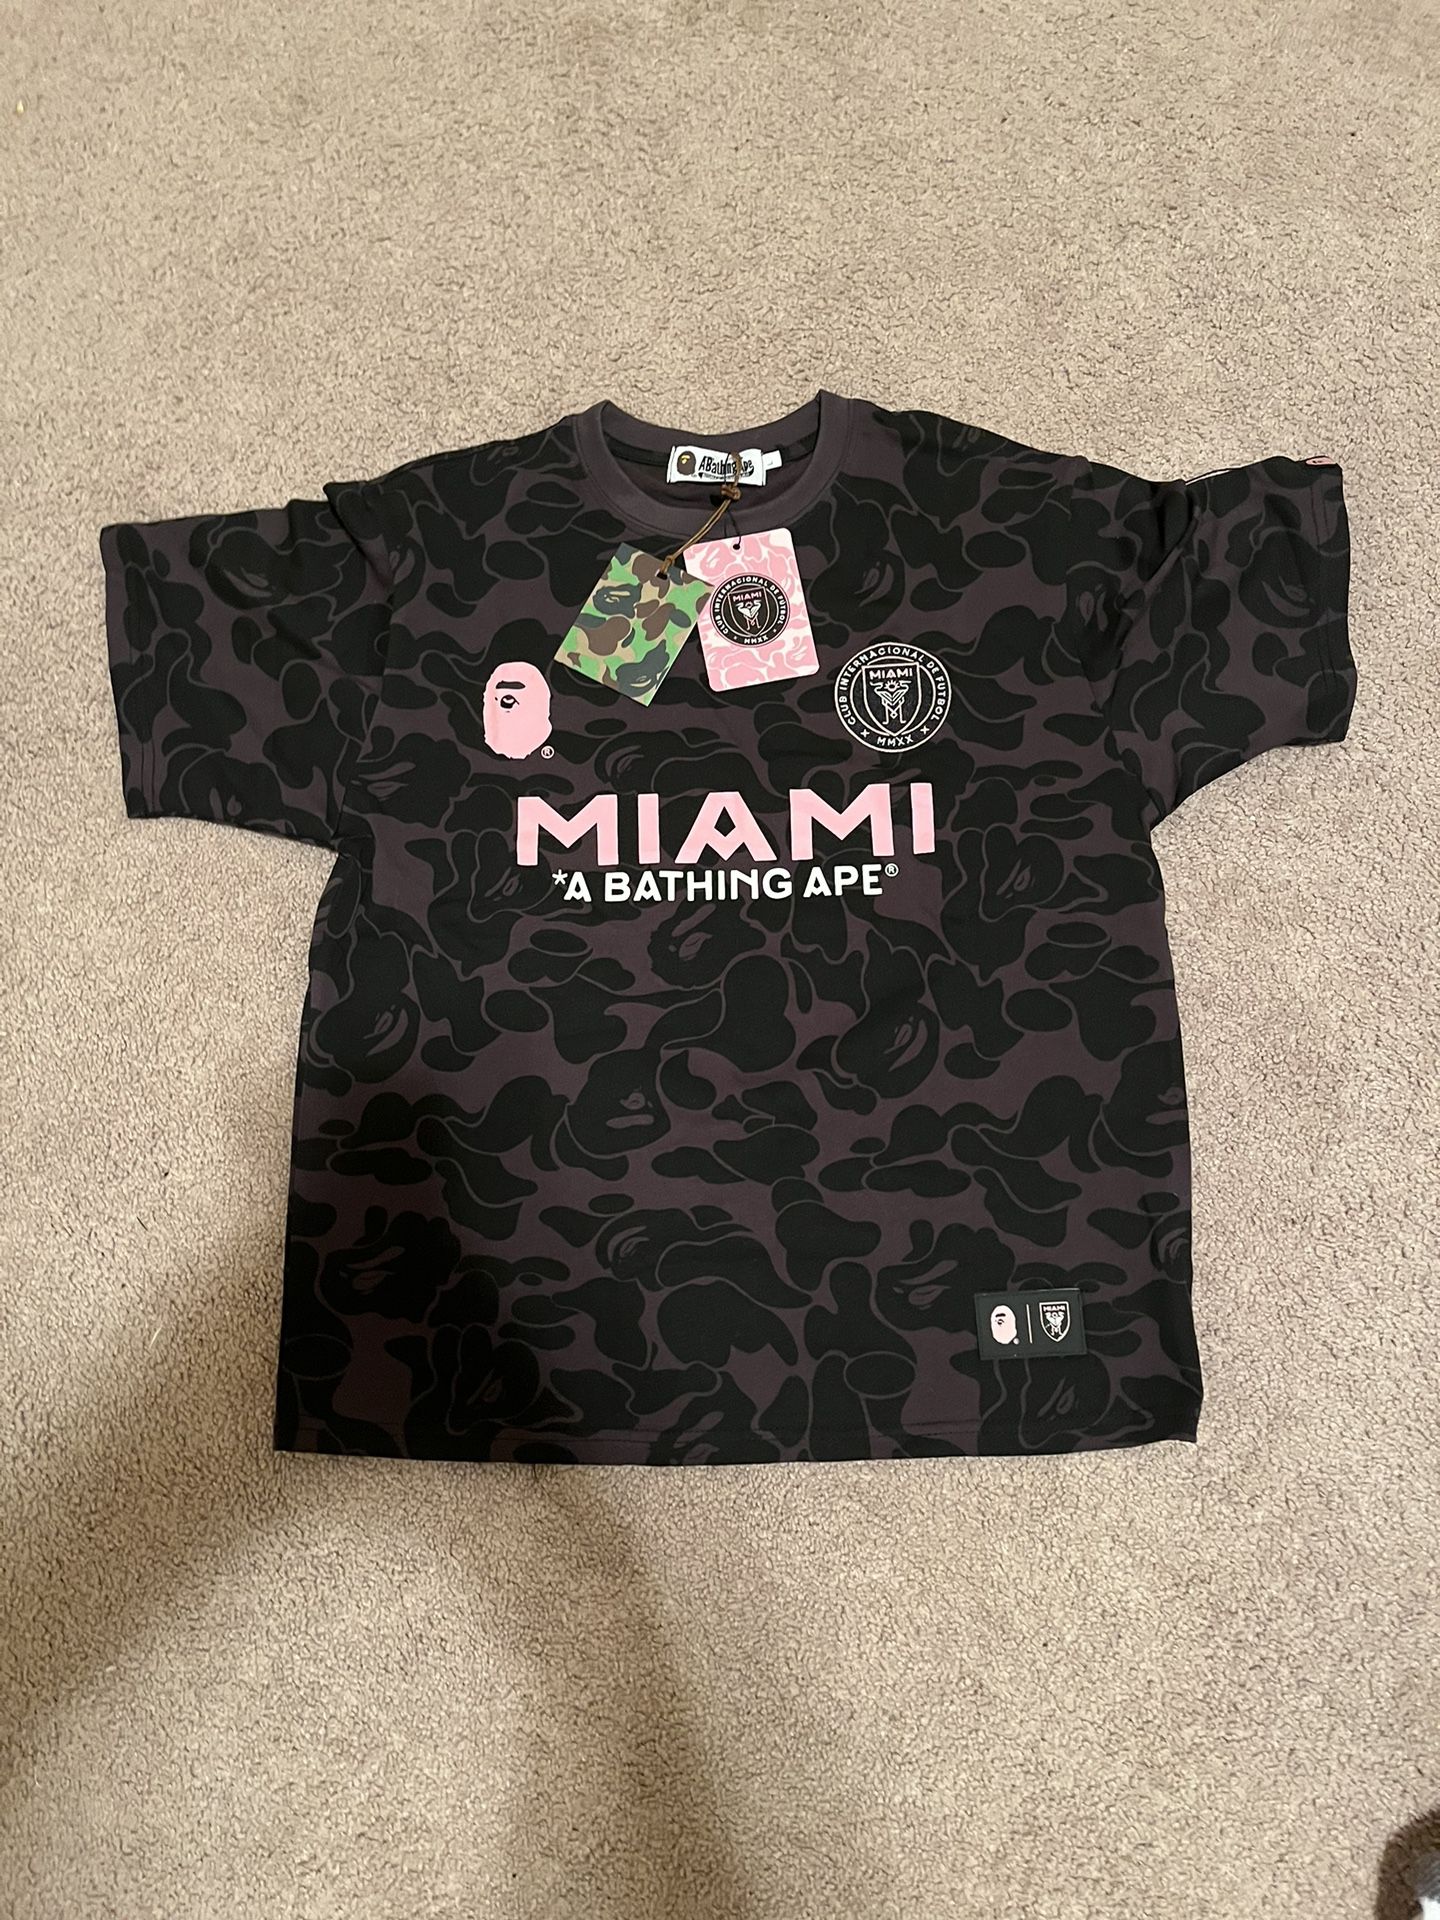 Bape Miami Shirt Size Large( NEGOTATE WITH ME)